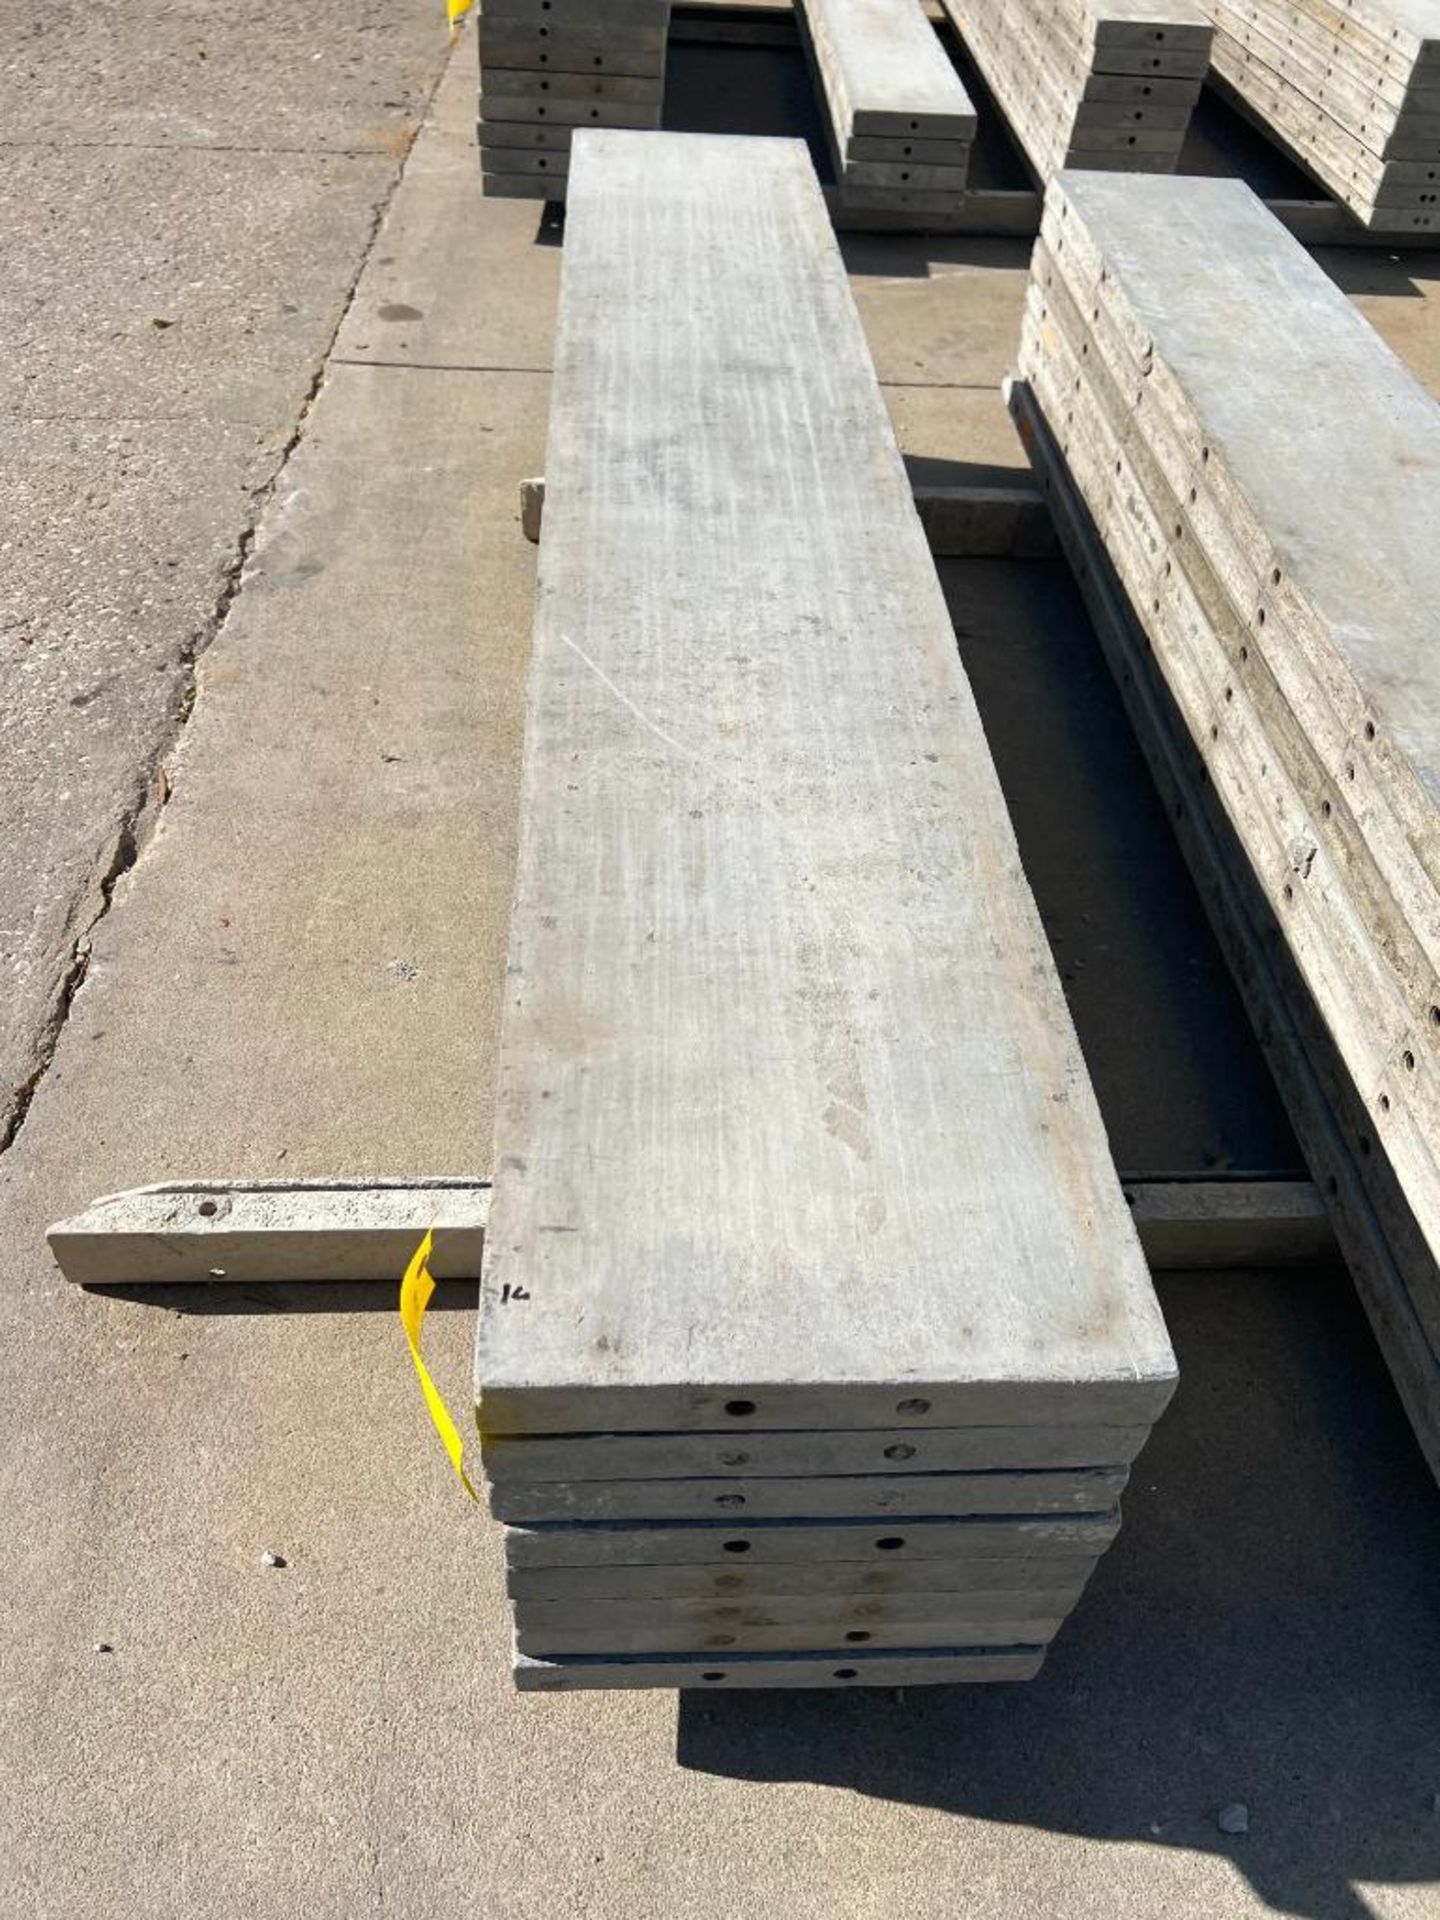 (8) 16" x 8' Wall Ties Smooth Aluminum Concrete Forms, 6-12 Hole Pattern. Located in Mt. Pleasant, I